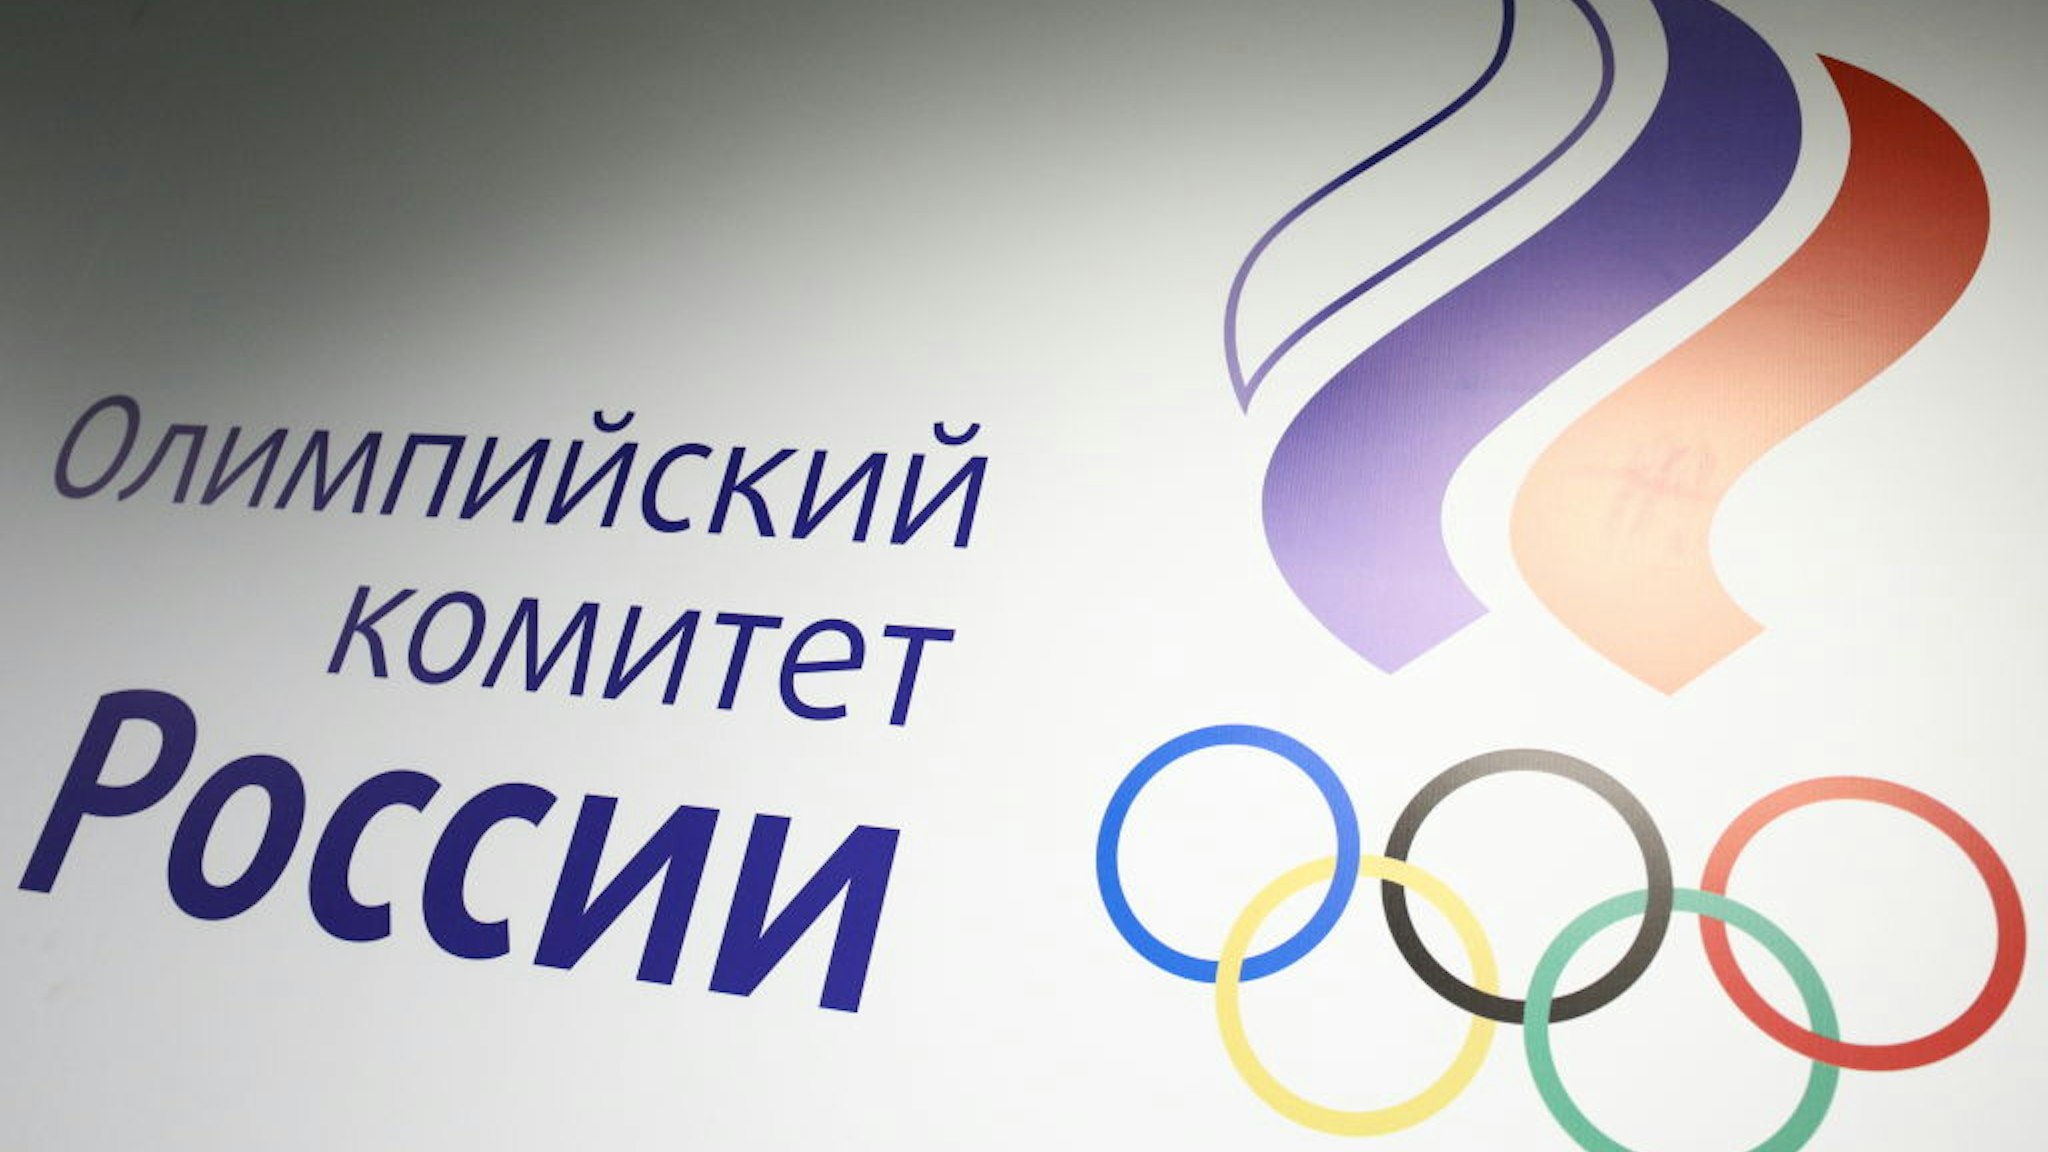 ROC logo after a session of the Russian Olympic Committee (ROC) to discuss the IOC decision to suspend the Russian Olympic Committee and let Russian clean athletes competes under a neutral flag at the 2018 Winter Olympic Games in Pyeongchang.